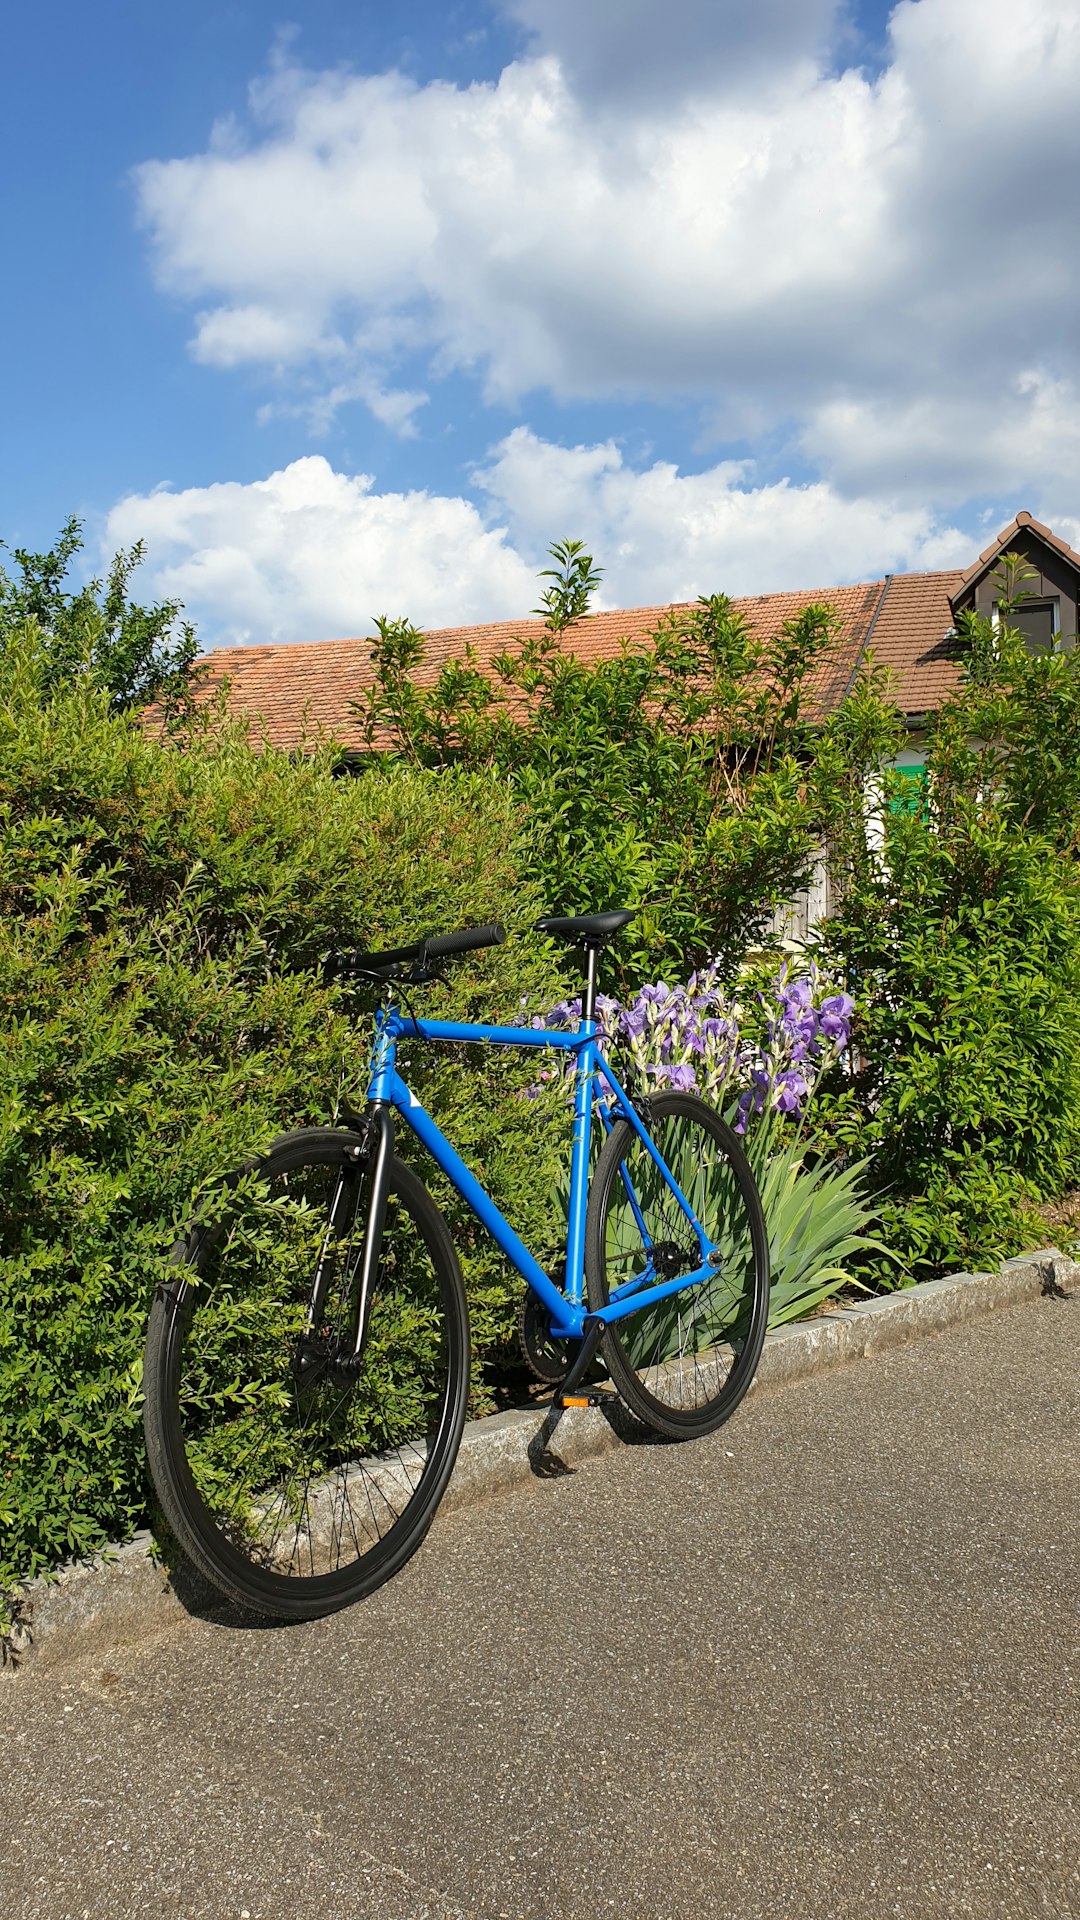 blue and black road bike parked beside green plants during daytime